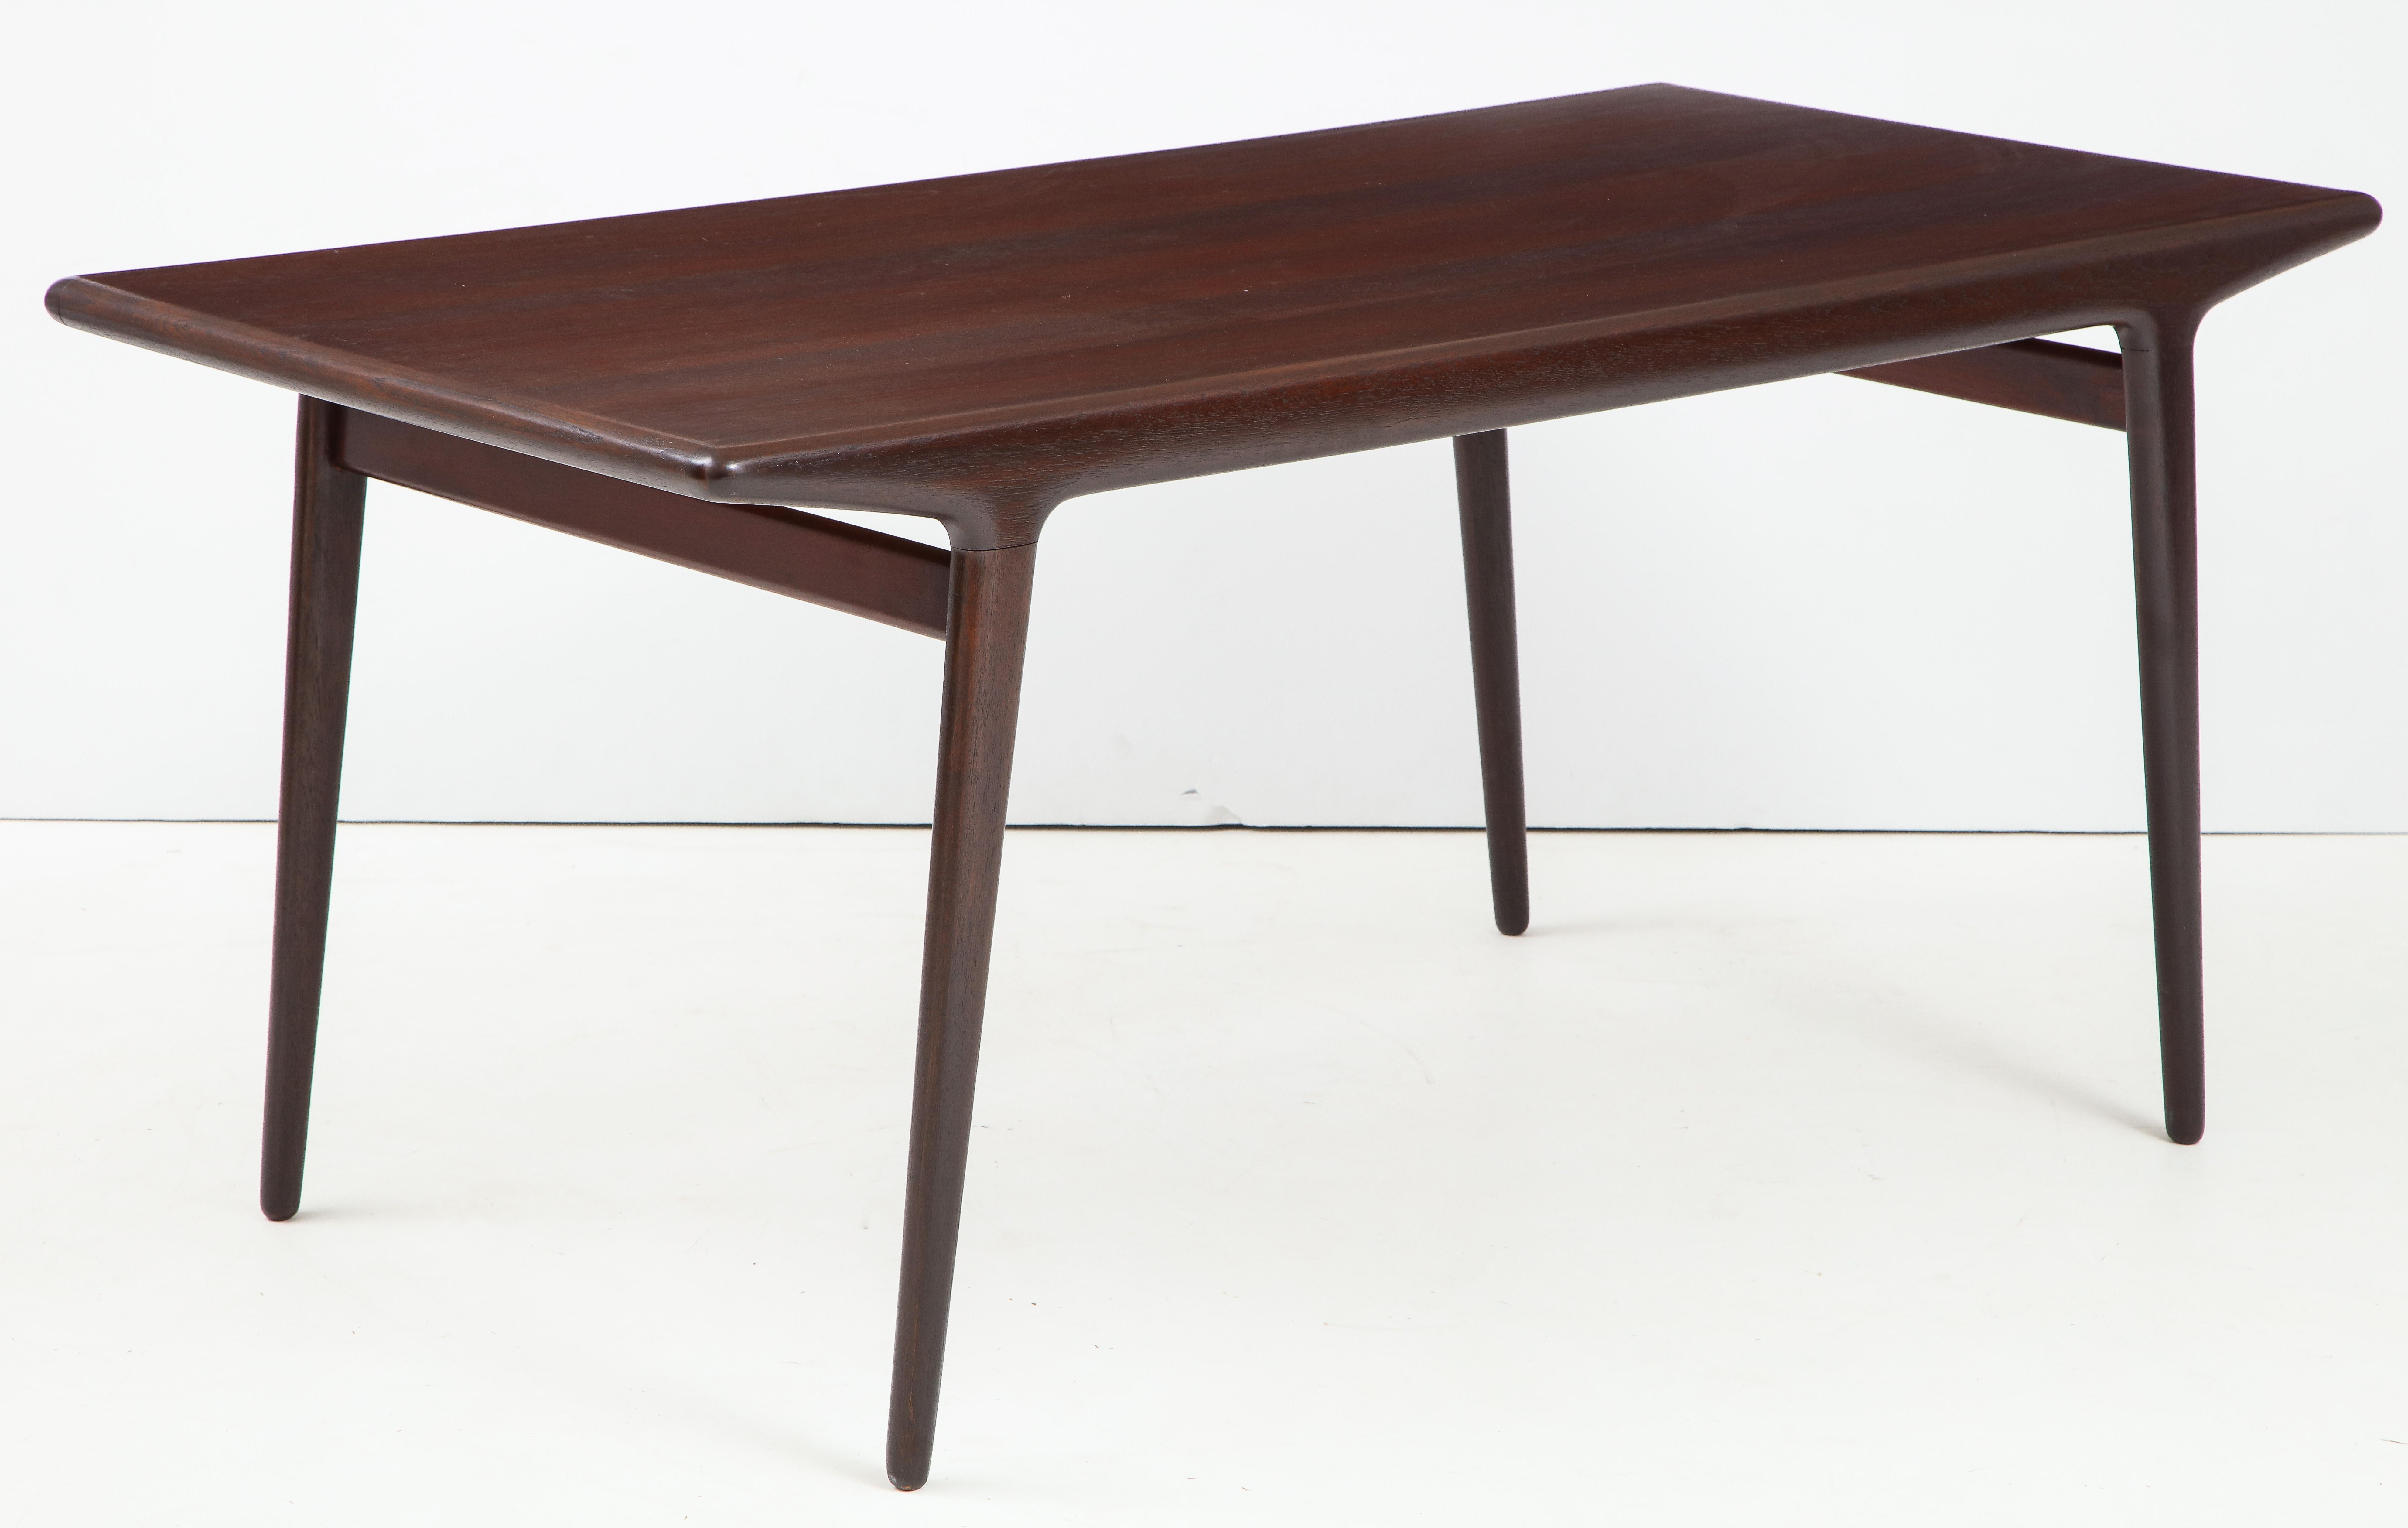 Stunning 1960s modernist teak dining table designed by Johannes Andersen. Beautiful design it can be used as a dining table or desk.

         